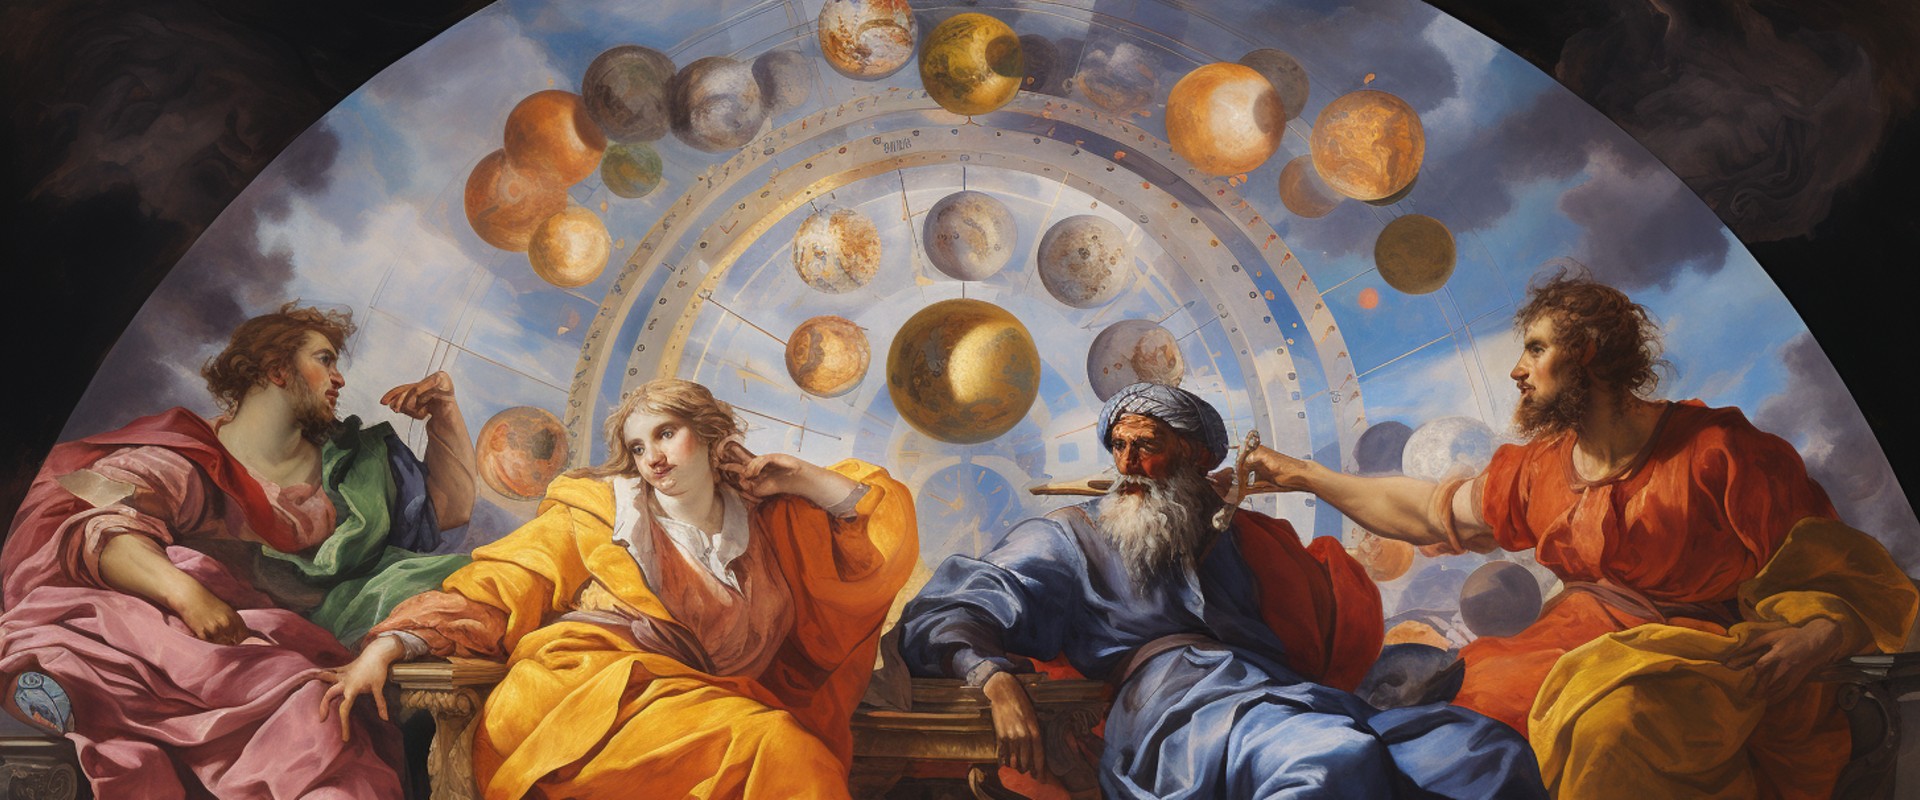 Is astrology supported by christianity?